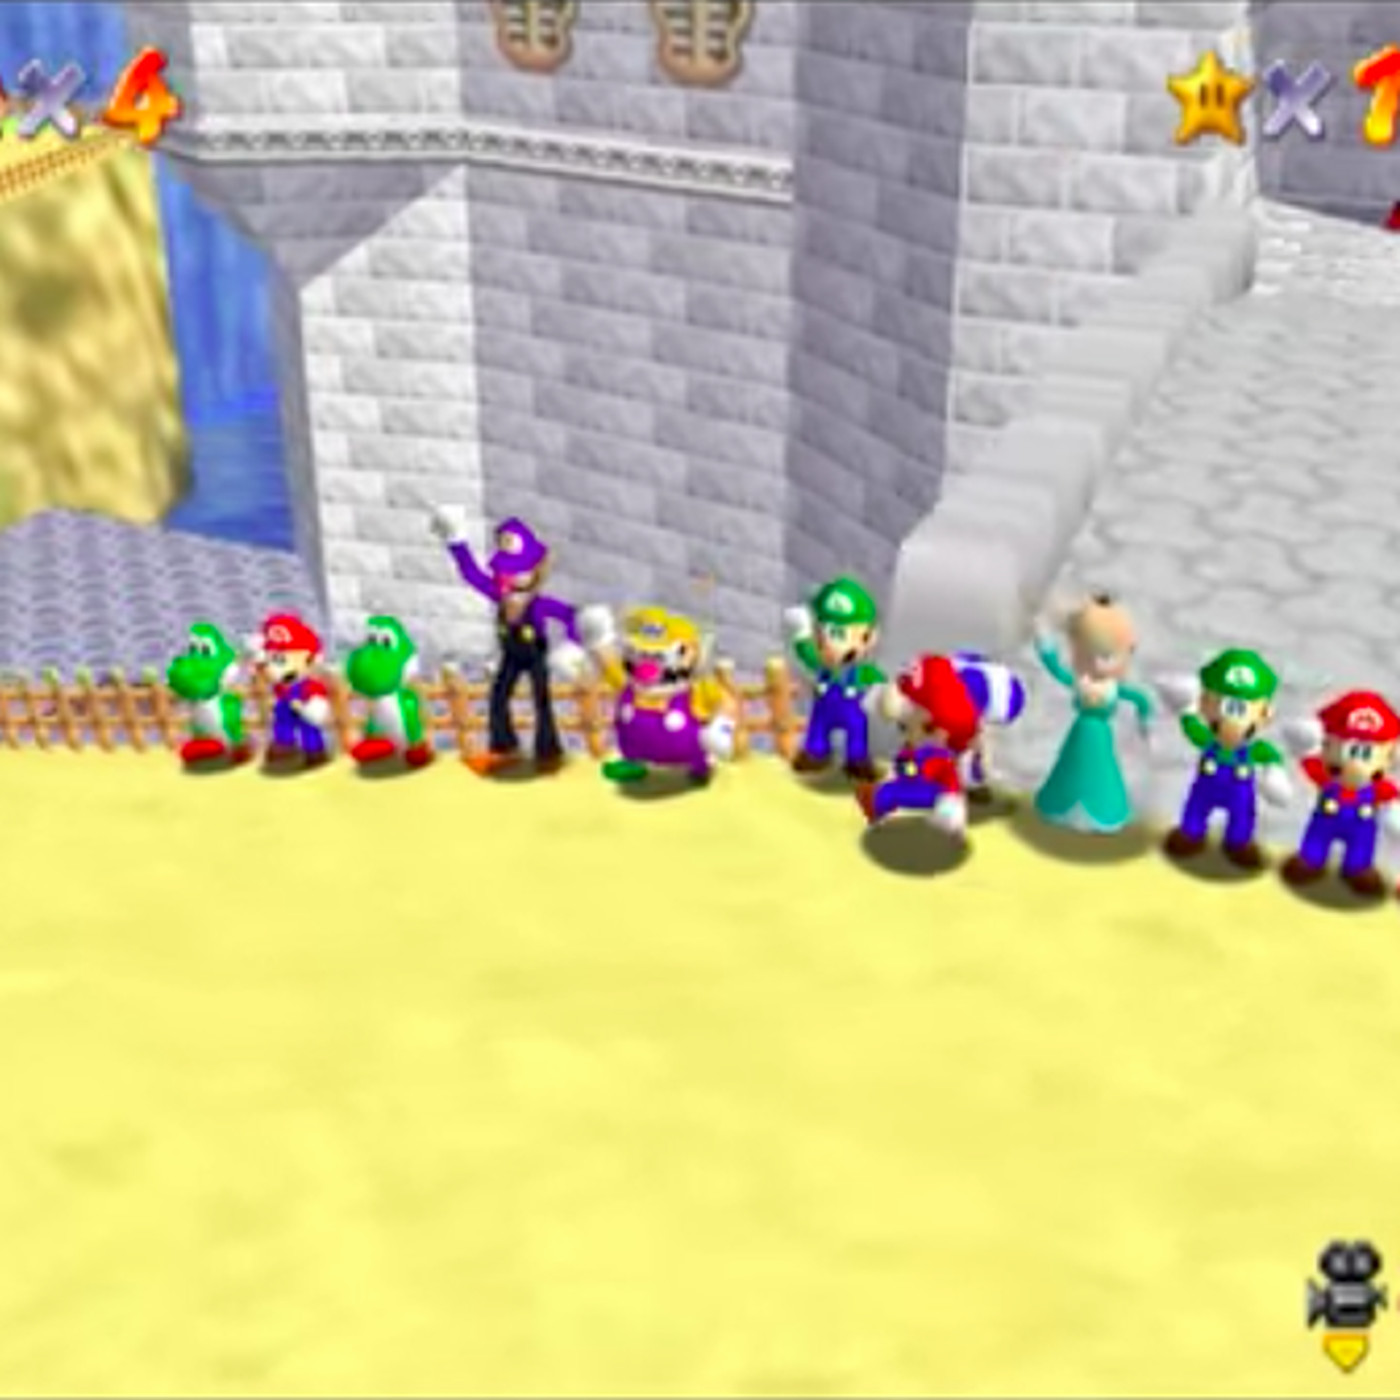 different characters super mario 64 online